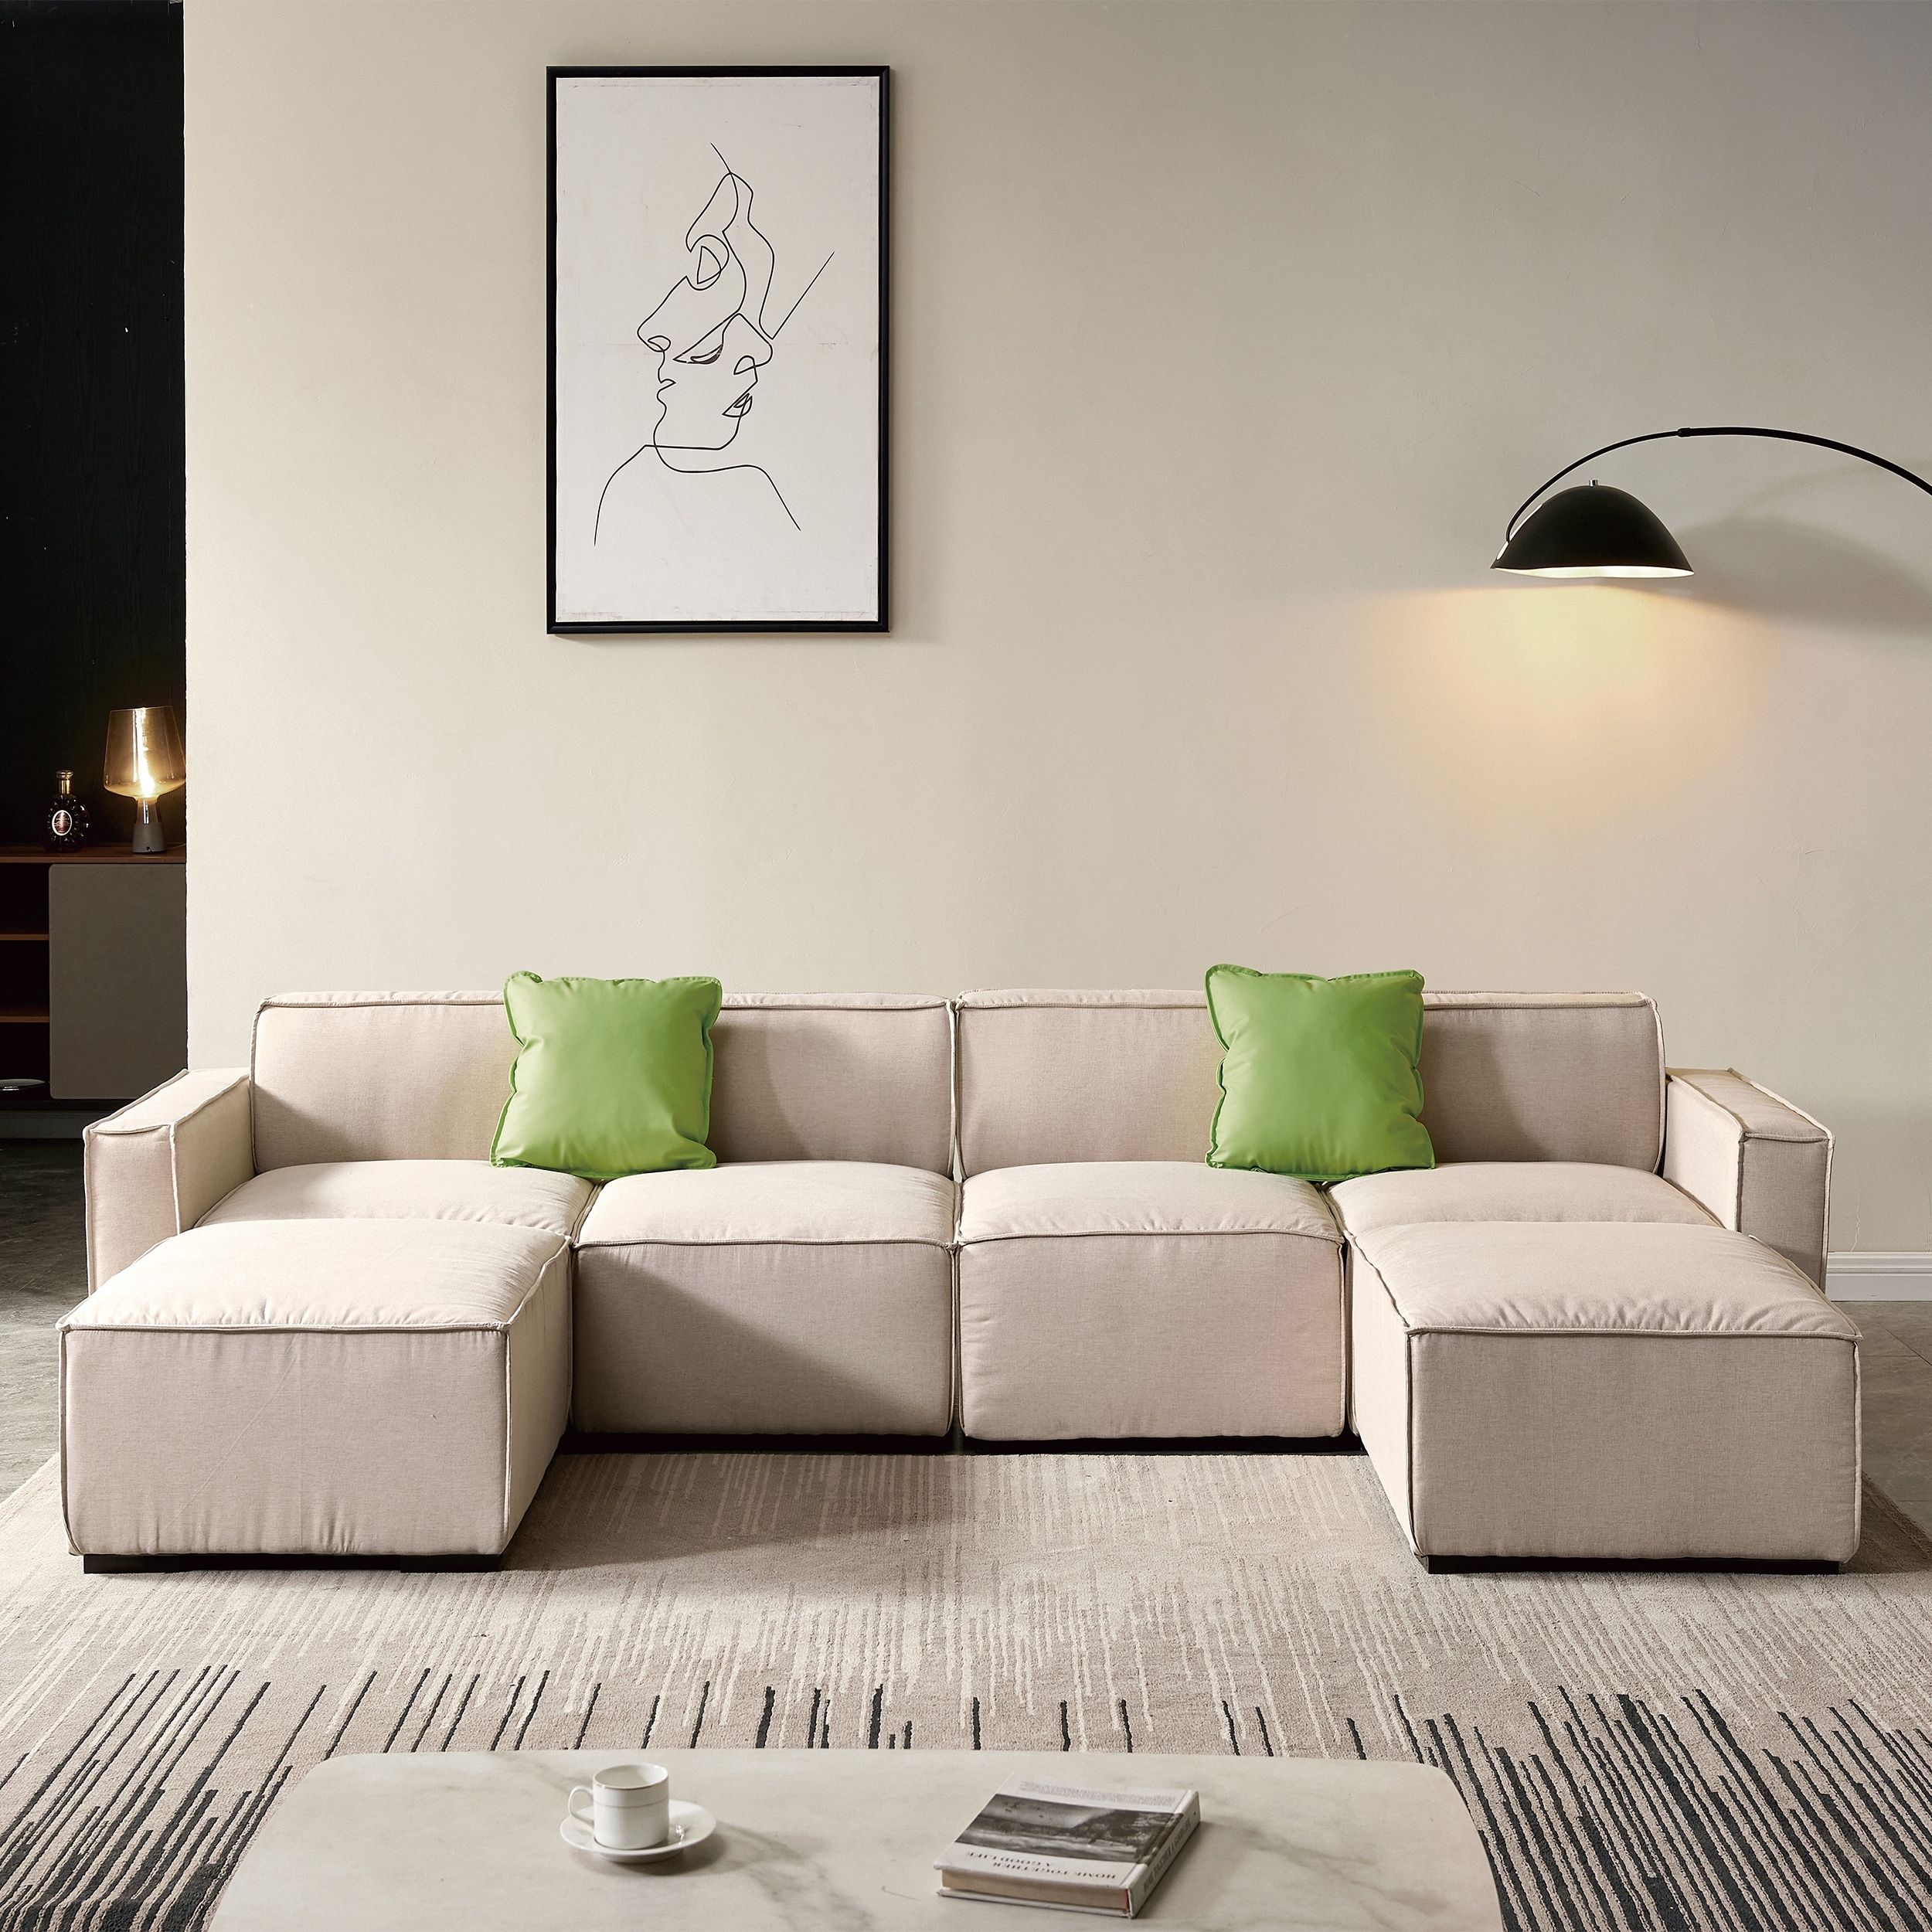 131" Convertible Modular Sectional Sofa Sets Modern U Shaped Sectional Couch  With Removable Ottomans For Living Room – Bed Bath & Beyond – 38149280 Inside Modern U Shaped Sectional Couch Sets (View 12 of 15)